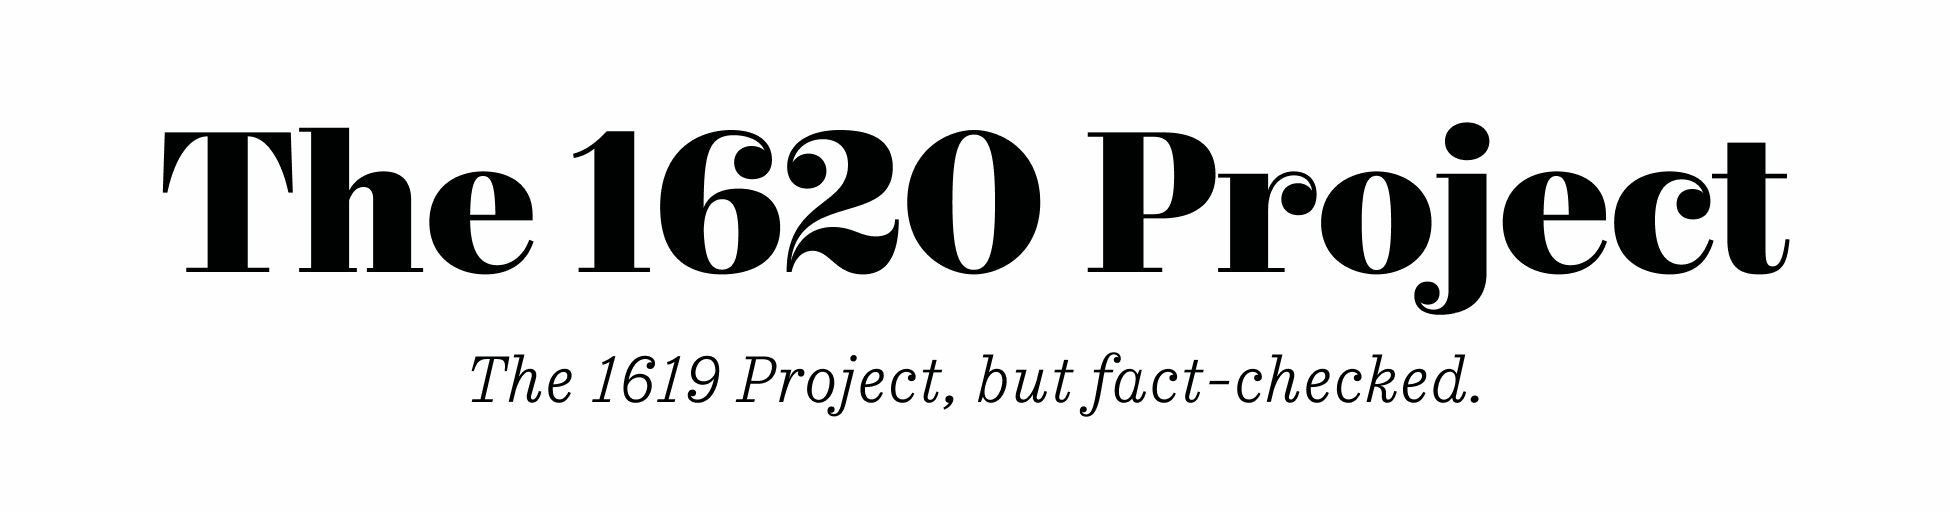 The 1620 Project. The 1619 Project, but fact-checked.